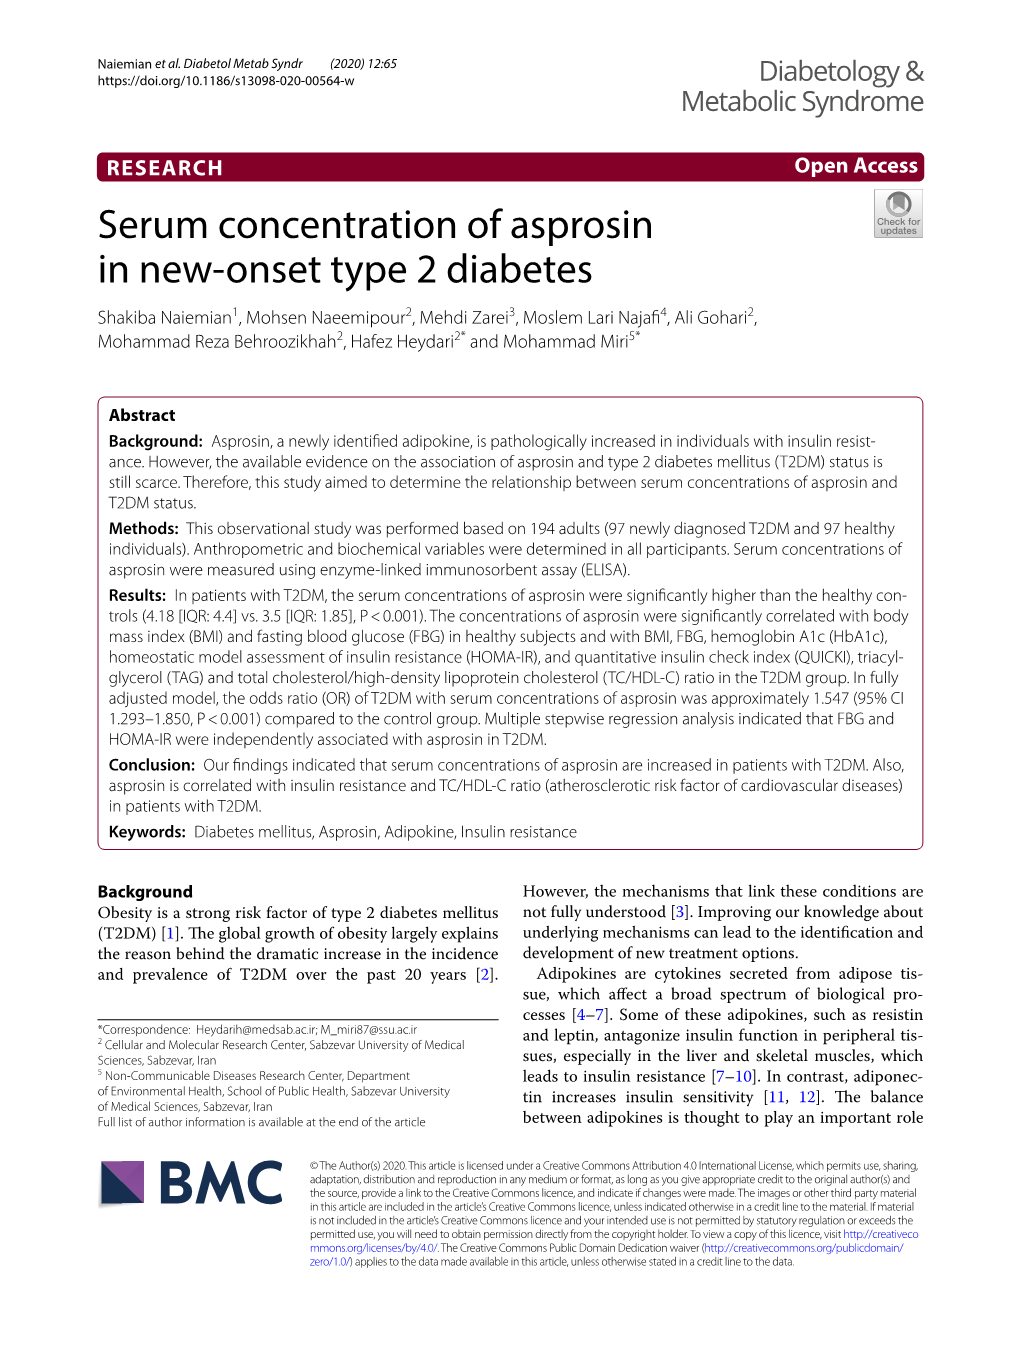 Serum Concentration of Asprosin in New-Onset Type 2 Diabetes